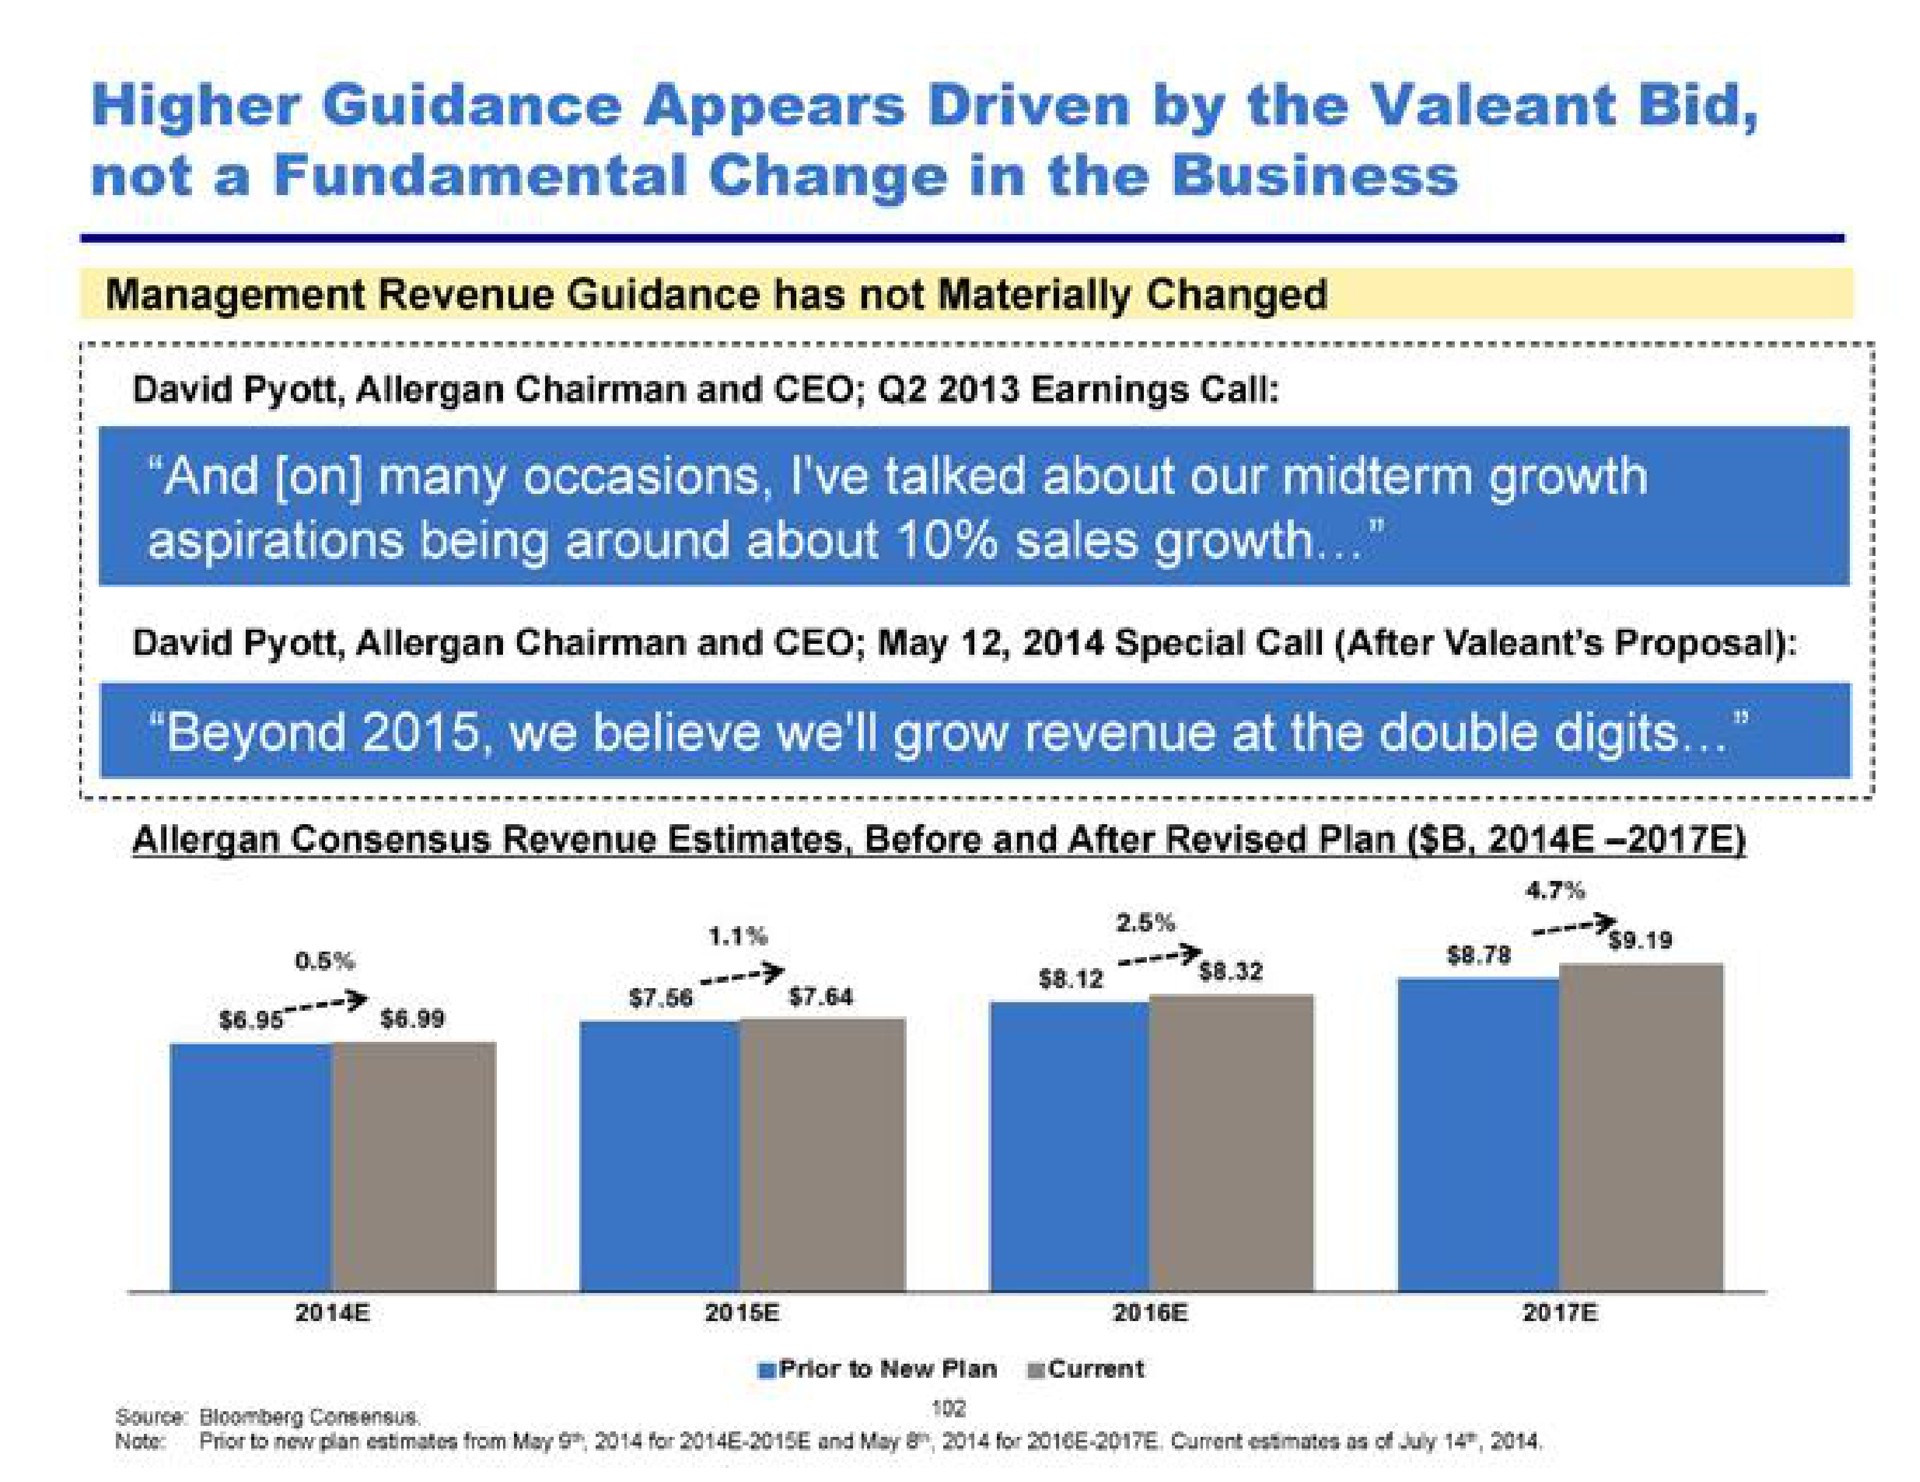 higher guidance appears driven by the bid aspirations being around about sales growth | Pershing Square